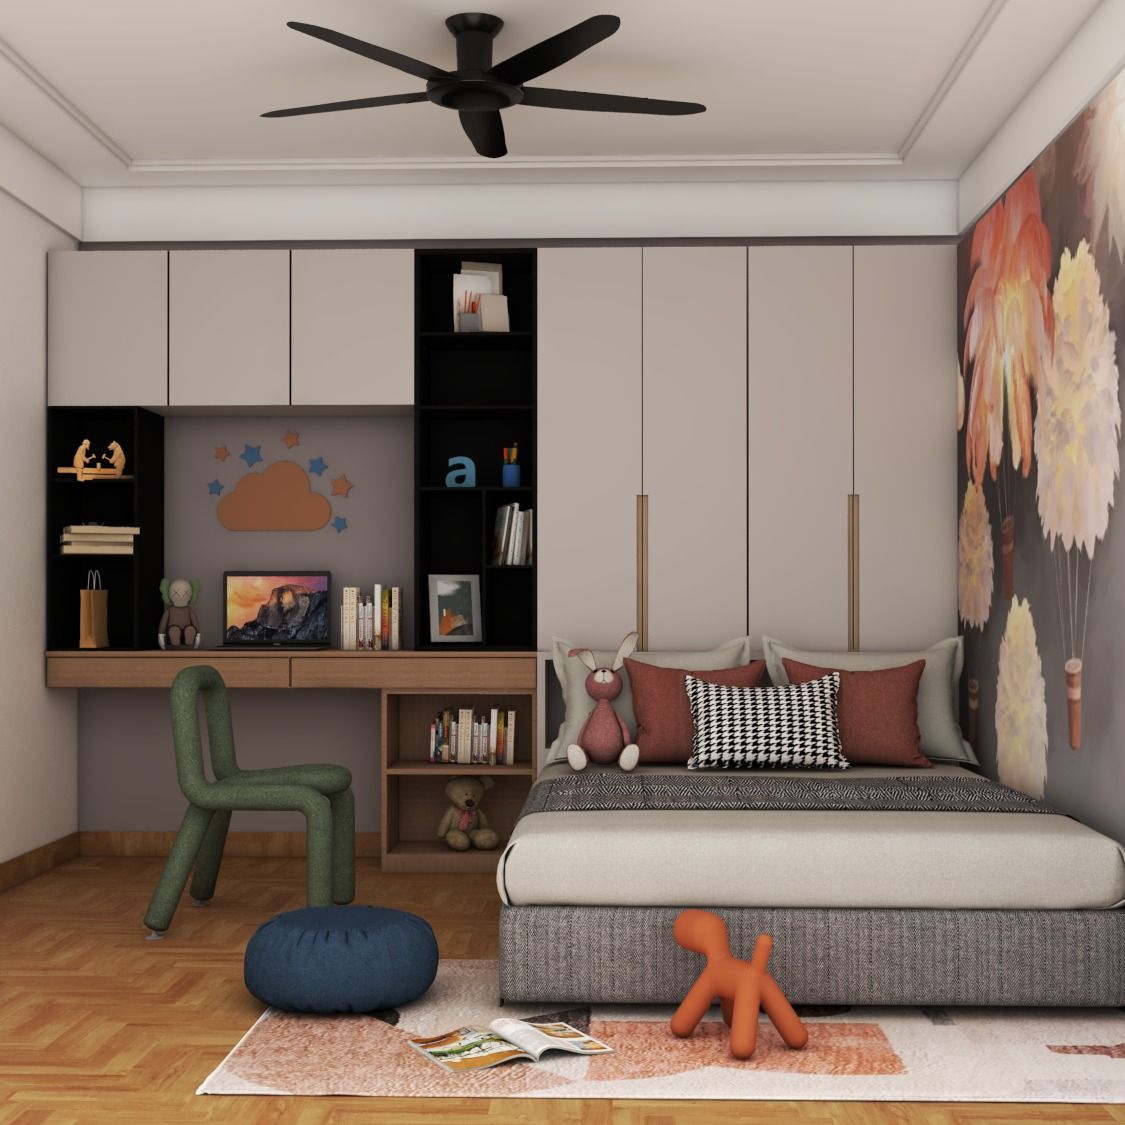 Minimal Kids Room Design With A Platform Bed And A Swing Wardrobe